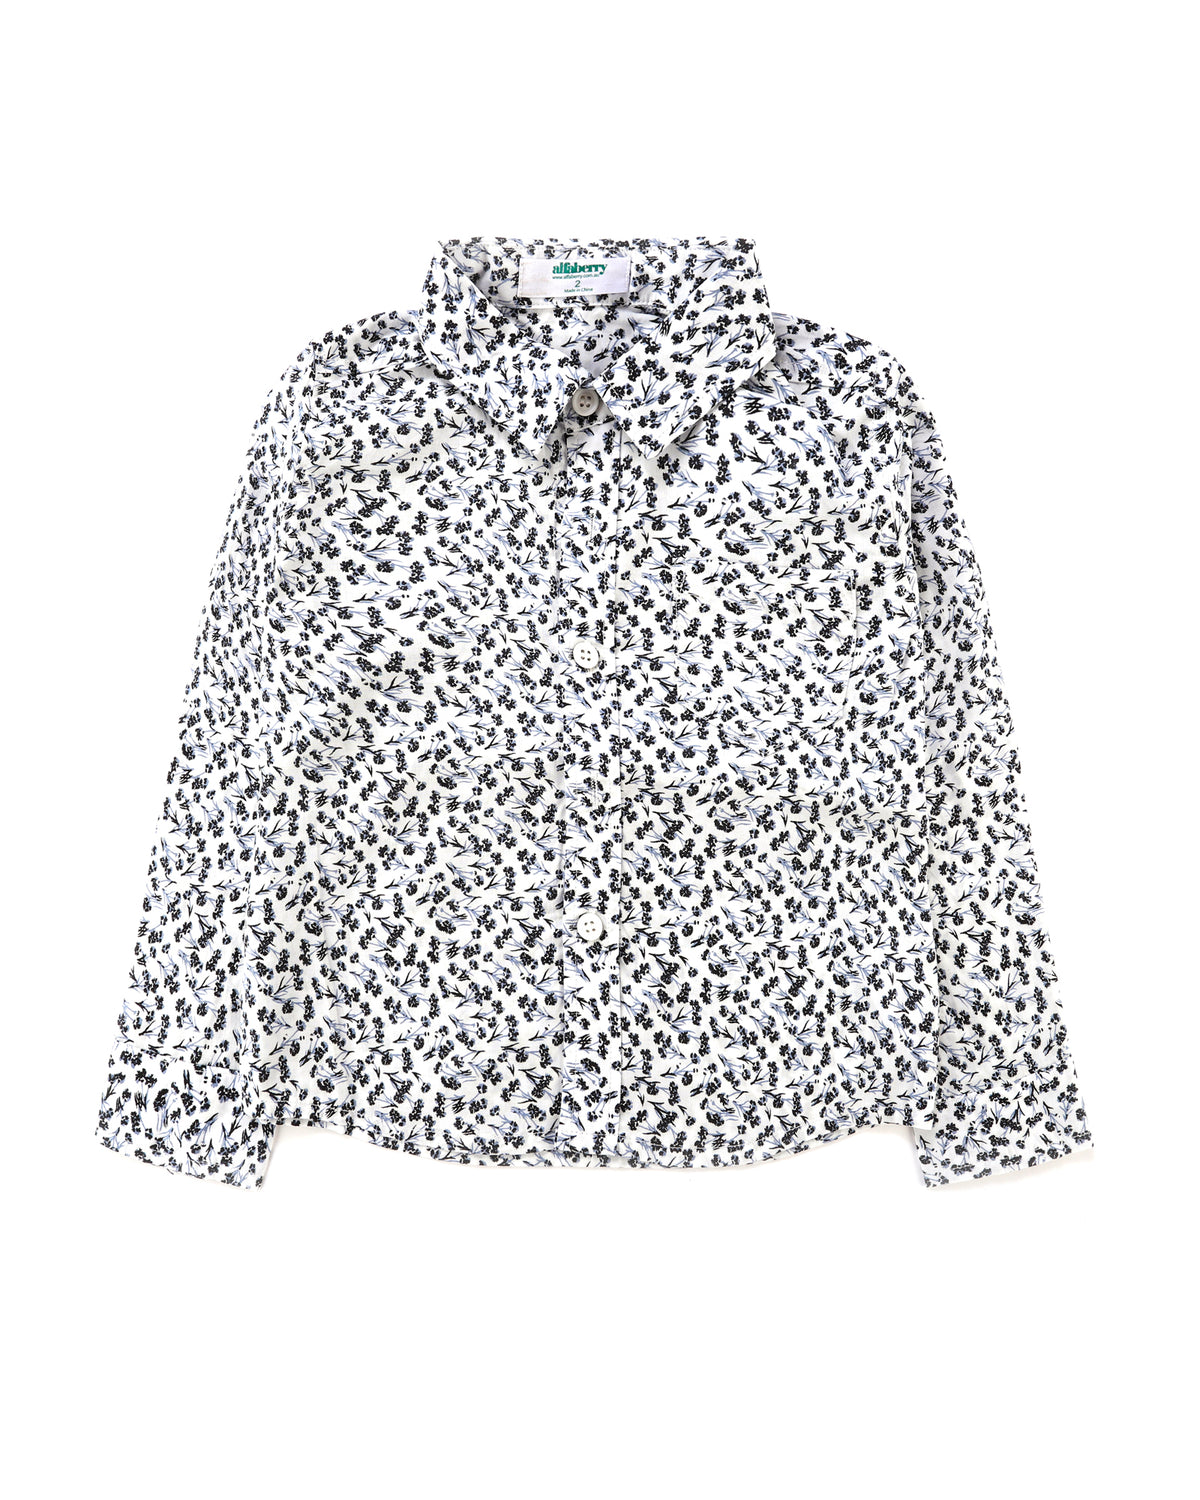 Floral Confetti Long Sleeve Shirt in Ivory Front